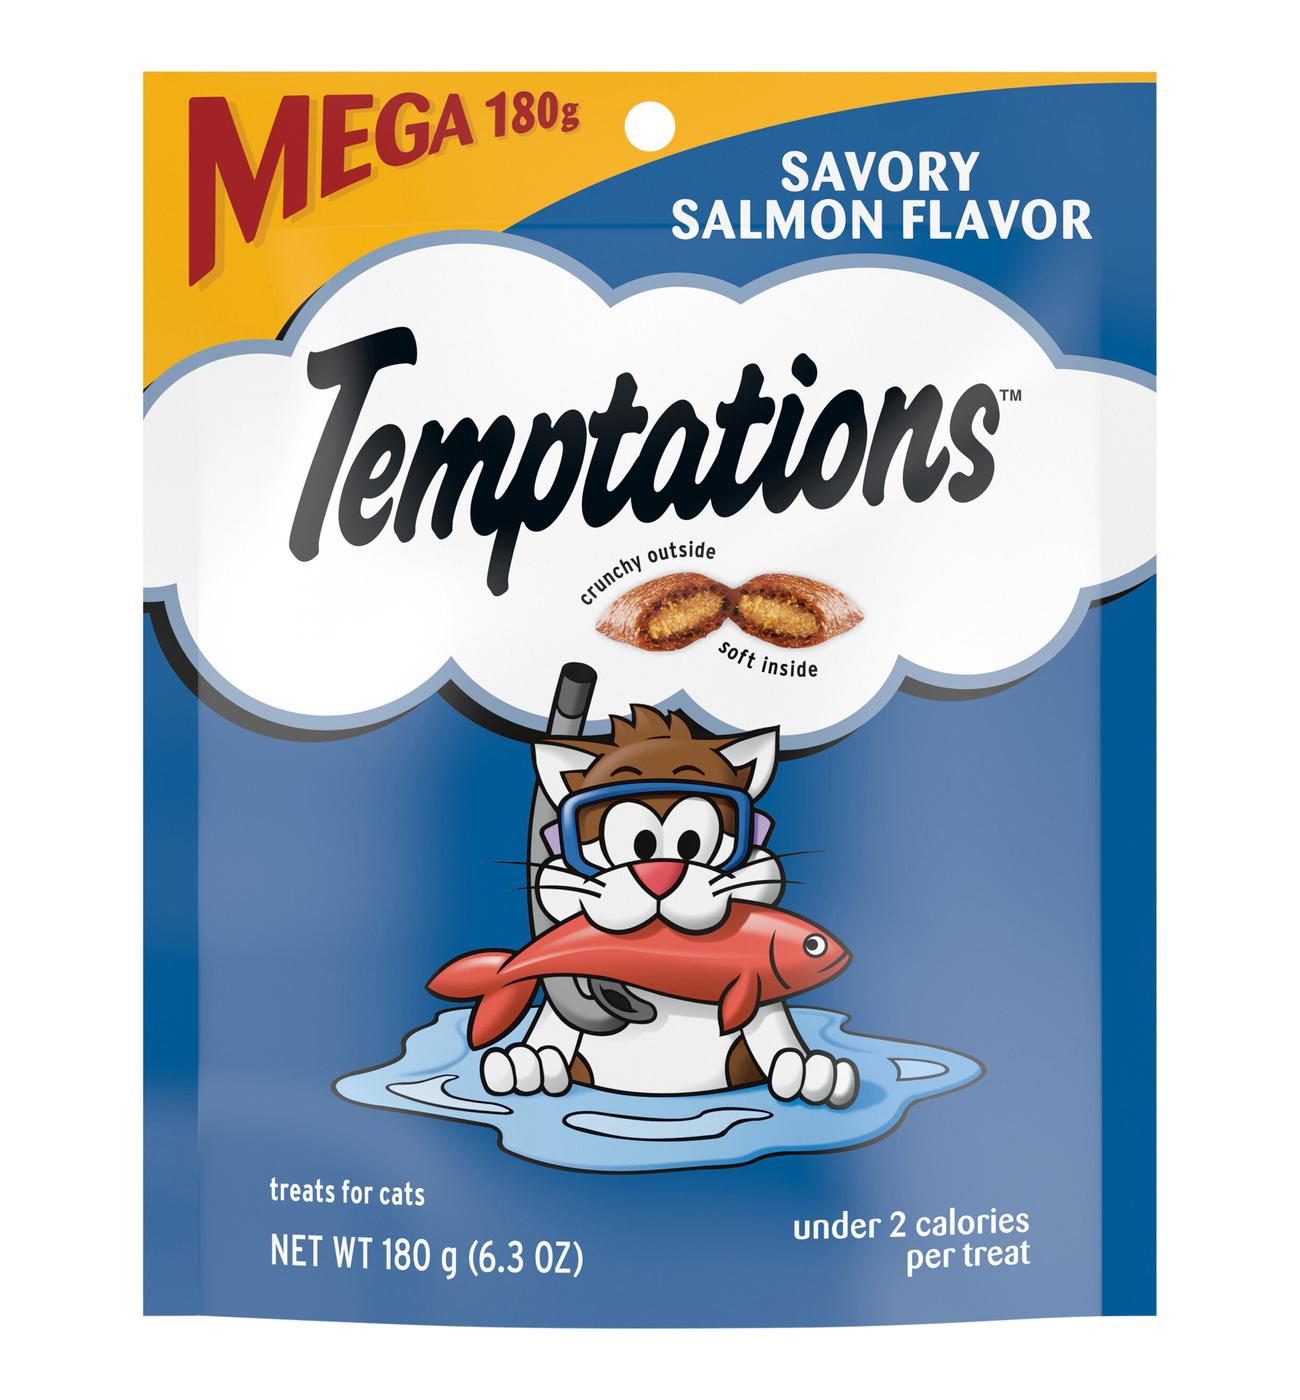 Temptations Classic Crunchy and Soft Cat Treats Savory Salmon Flavor; image 1 of 5